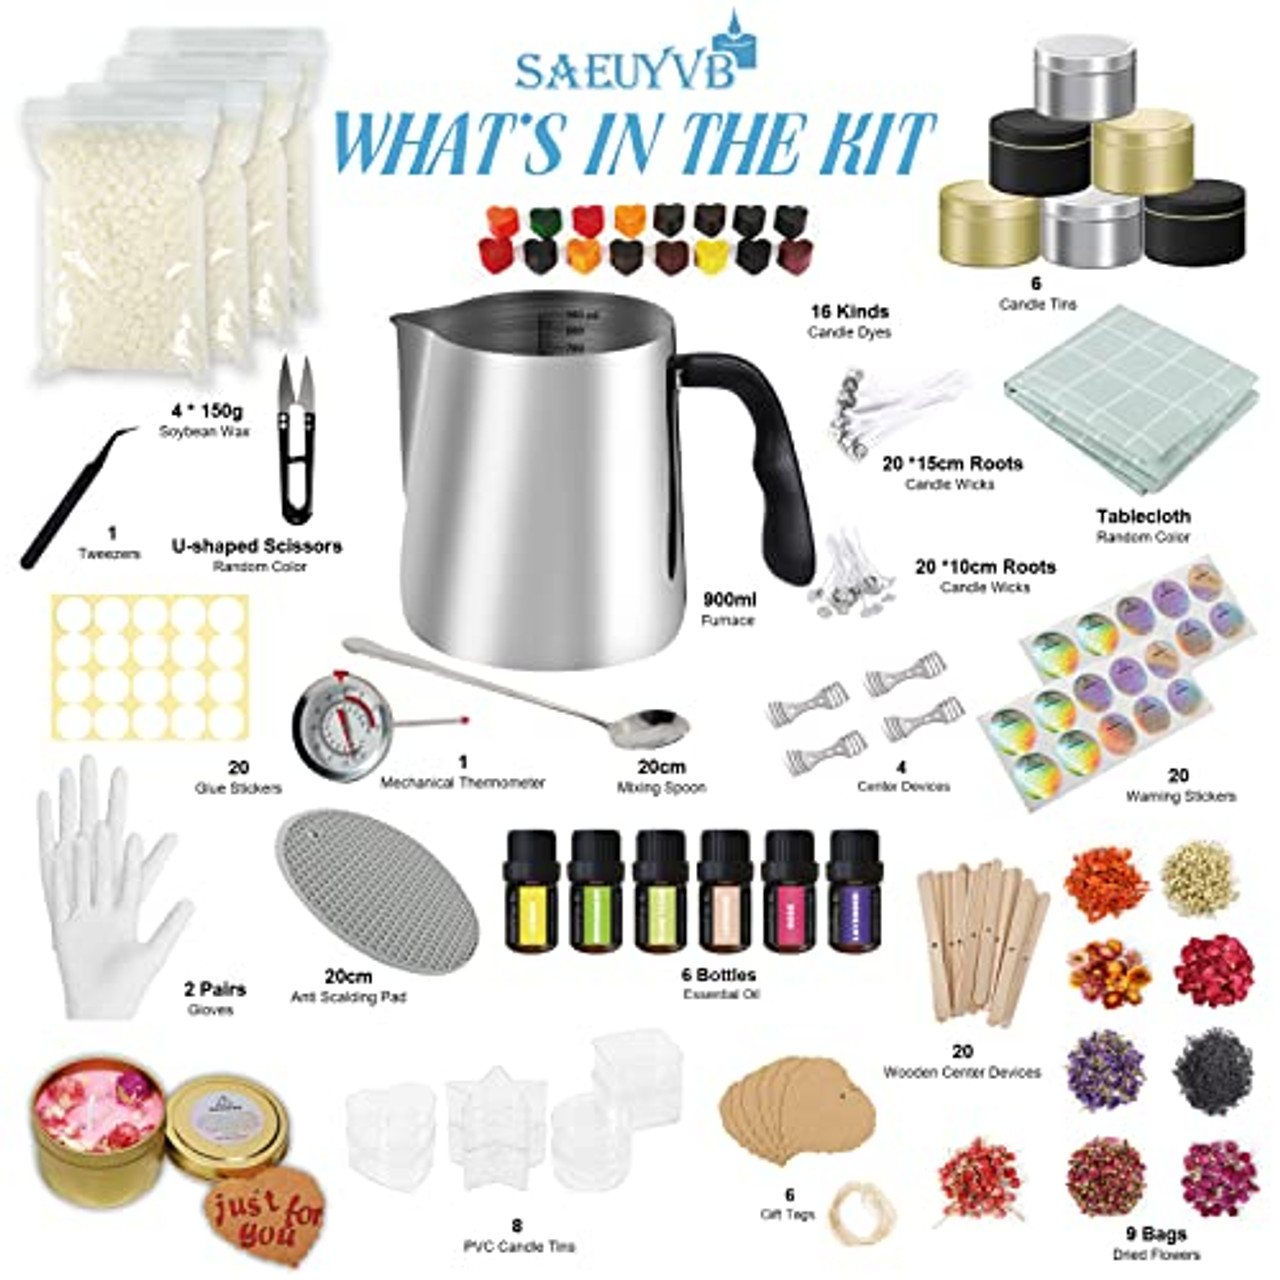 DIY Candle Making Kit With Wax Melter Electronic Hot Plate, Candle Making  Supplies: 5lbs Bulk Organic Soy Candle Wax Flakes 